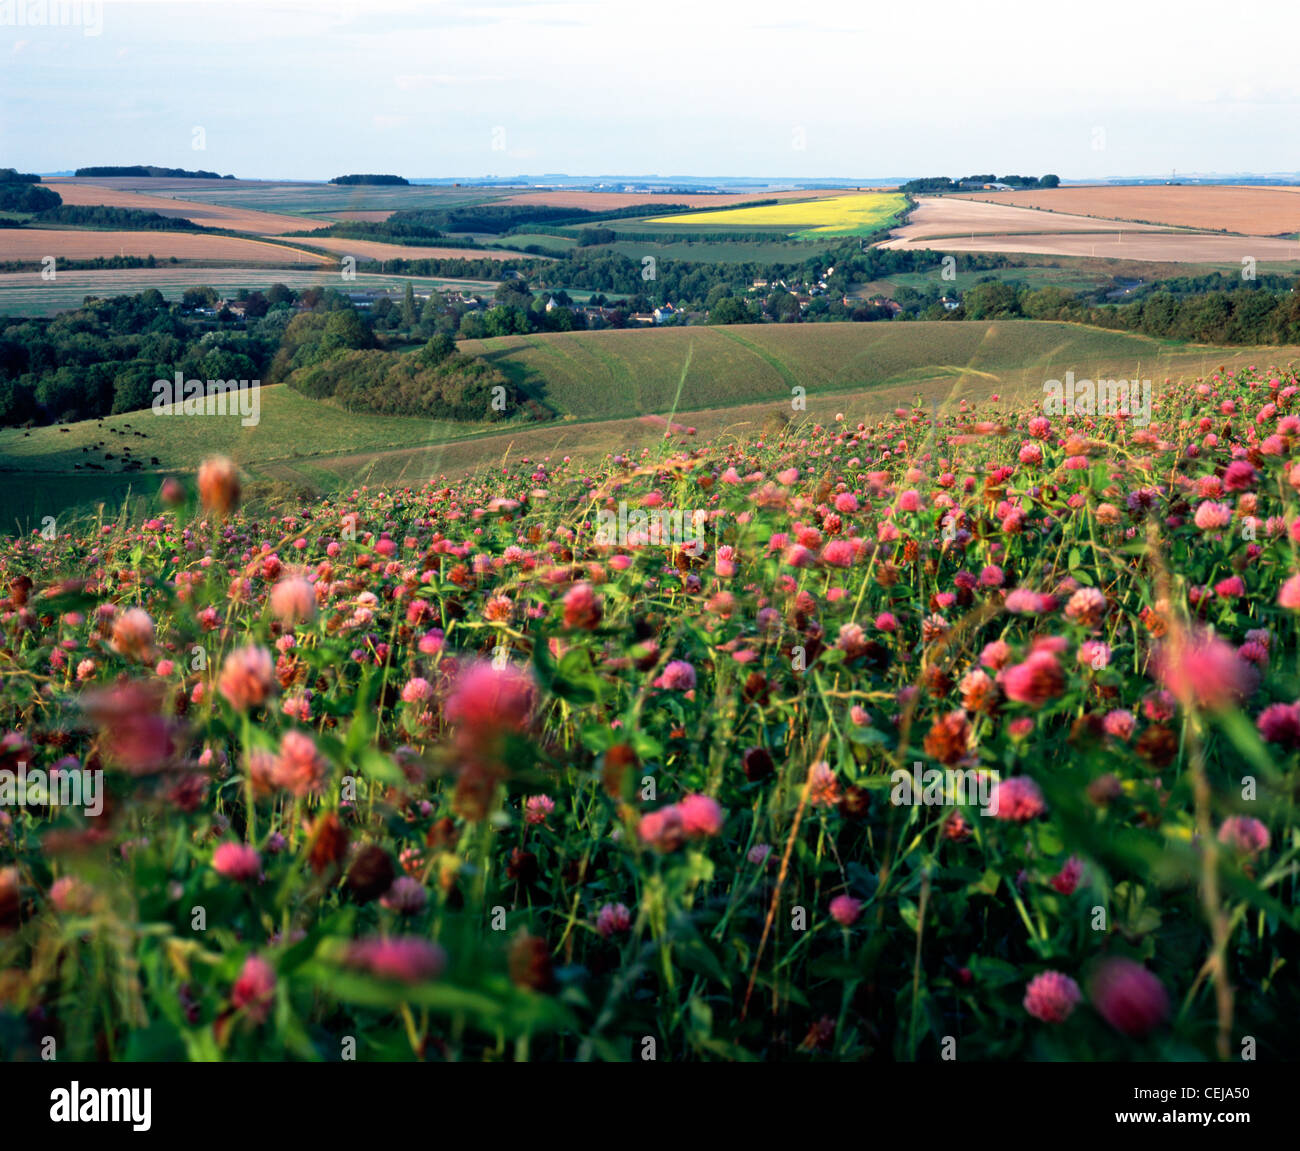 A field of red clover growing on a hillside near Hanging Langford in the Wylye Valley, Wiltshire, England. Stock Photo